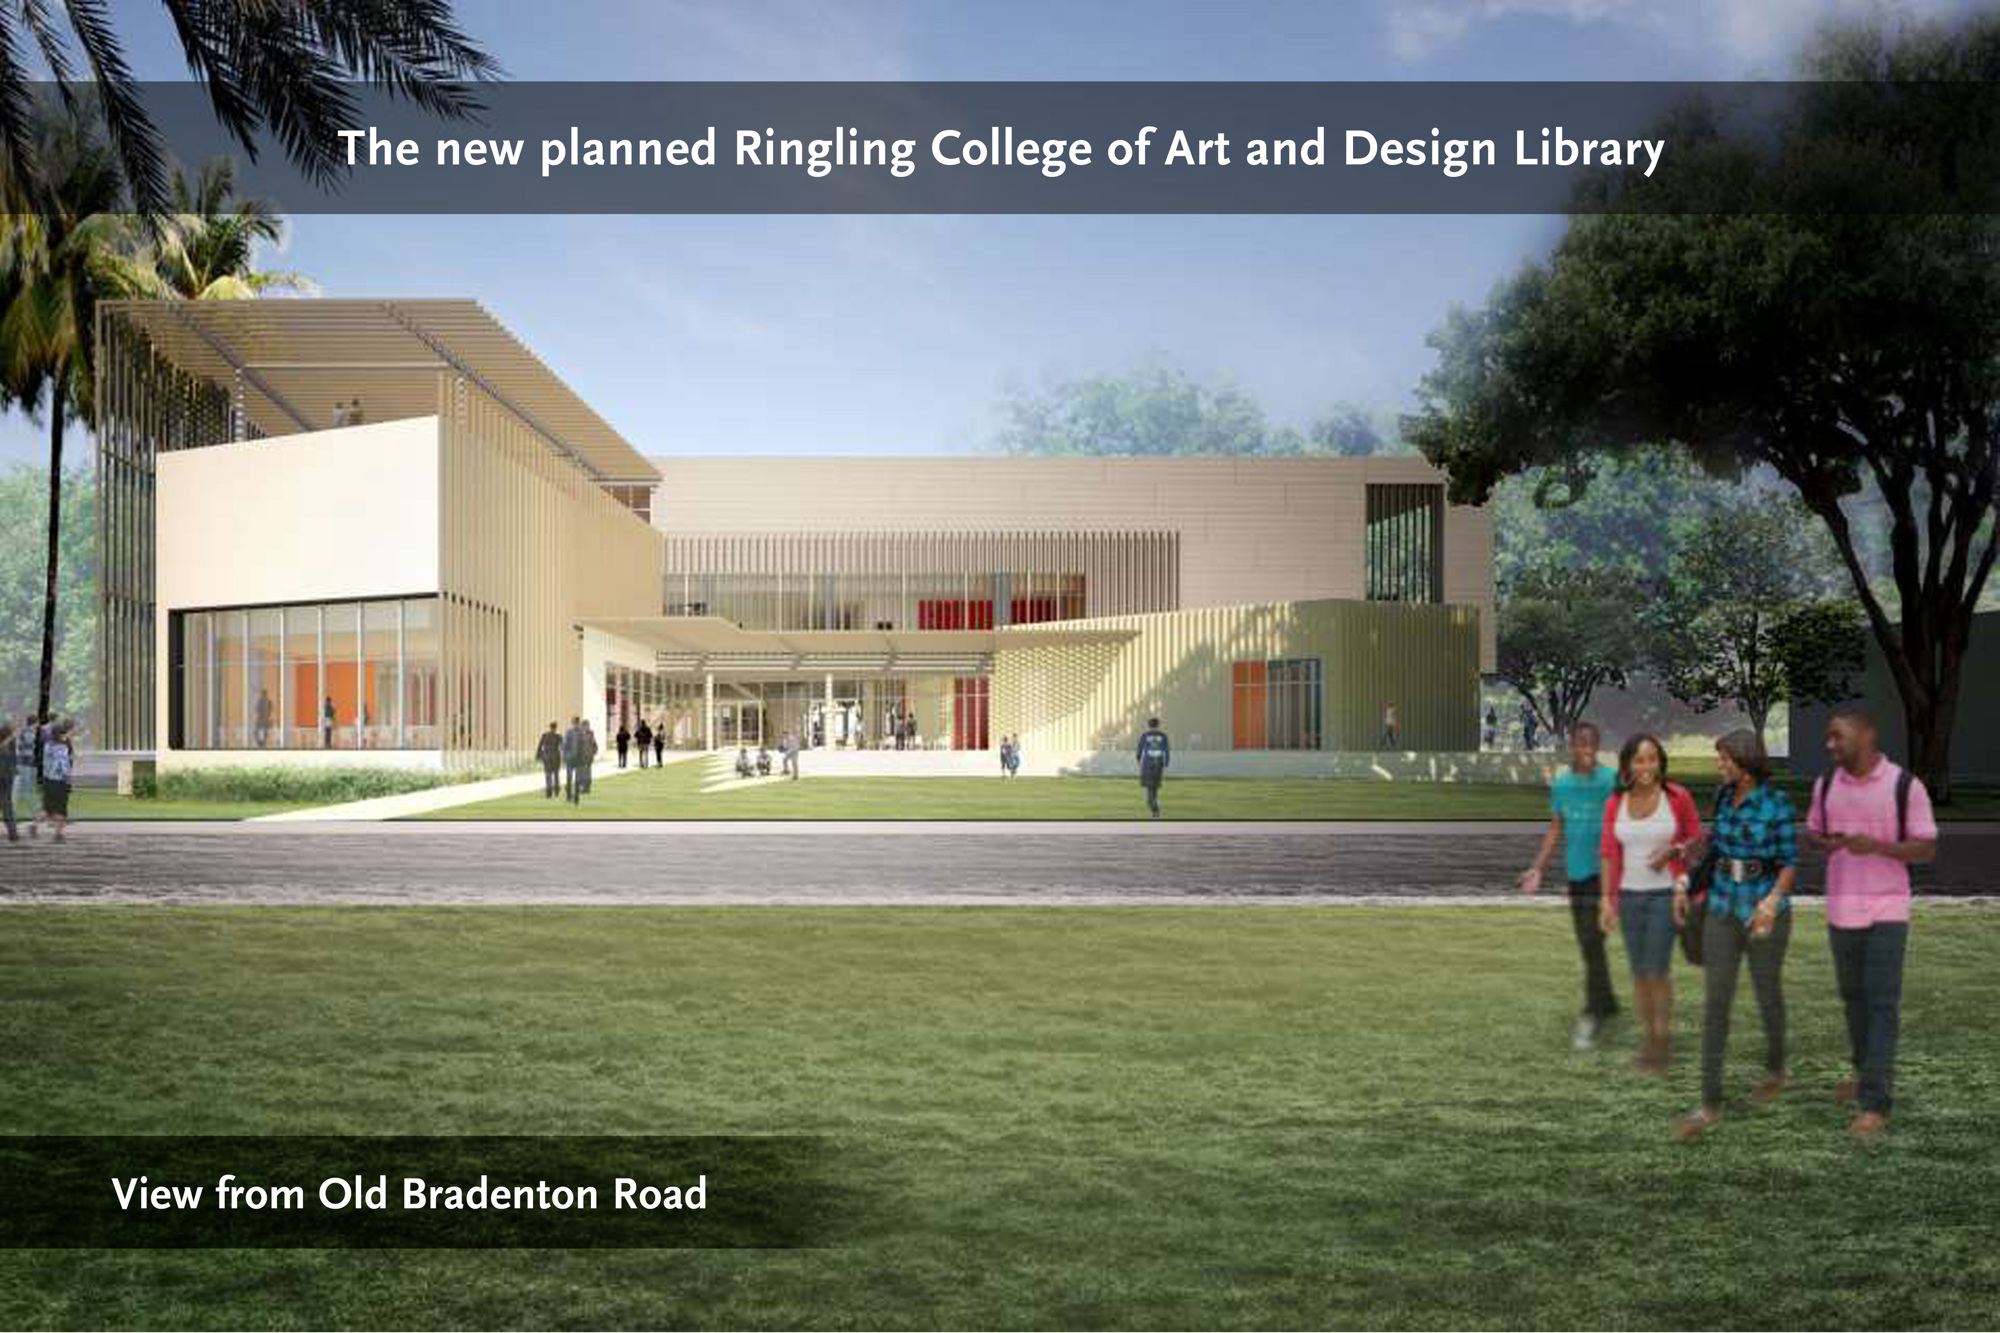 The library, which is currently under the early stages of construction, is slated to open in August 2016.